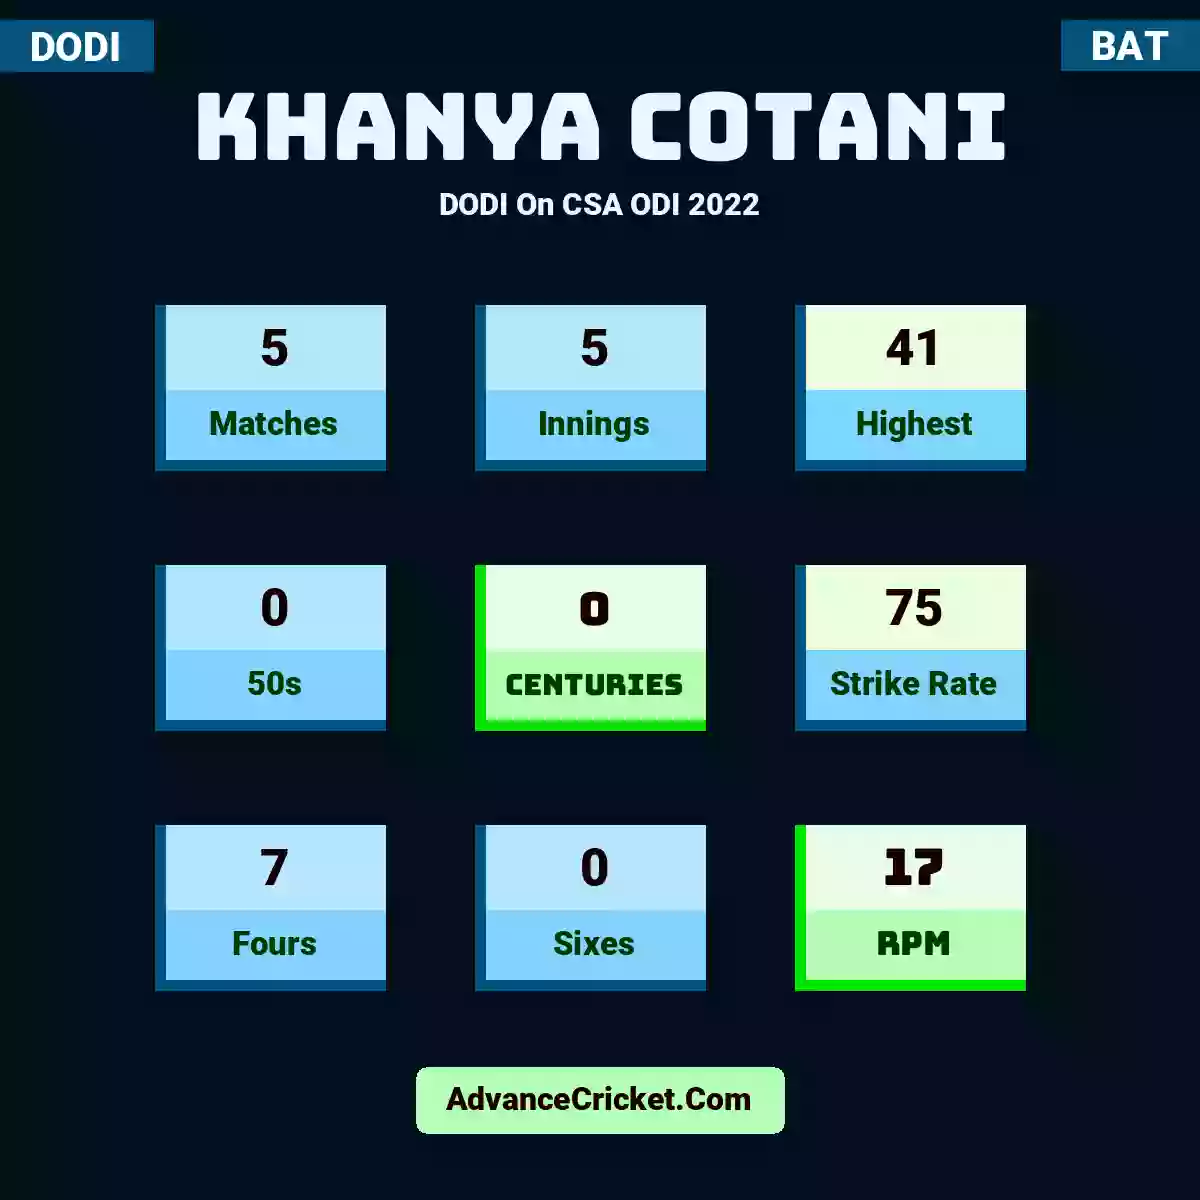 Khanya Cotani DODI  On CSA ODI 2022, Khanya Cotani played 5 matches, scored 41 runs as highest, 0 half-centuries, and 0 centuries, with a strike rate of 75. K.Cotani hit 7 fours and 0 sixes, with an RPM of 17.